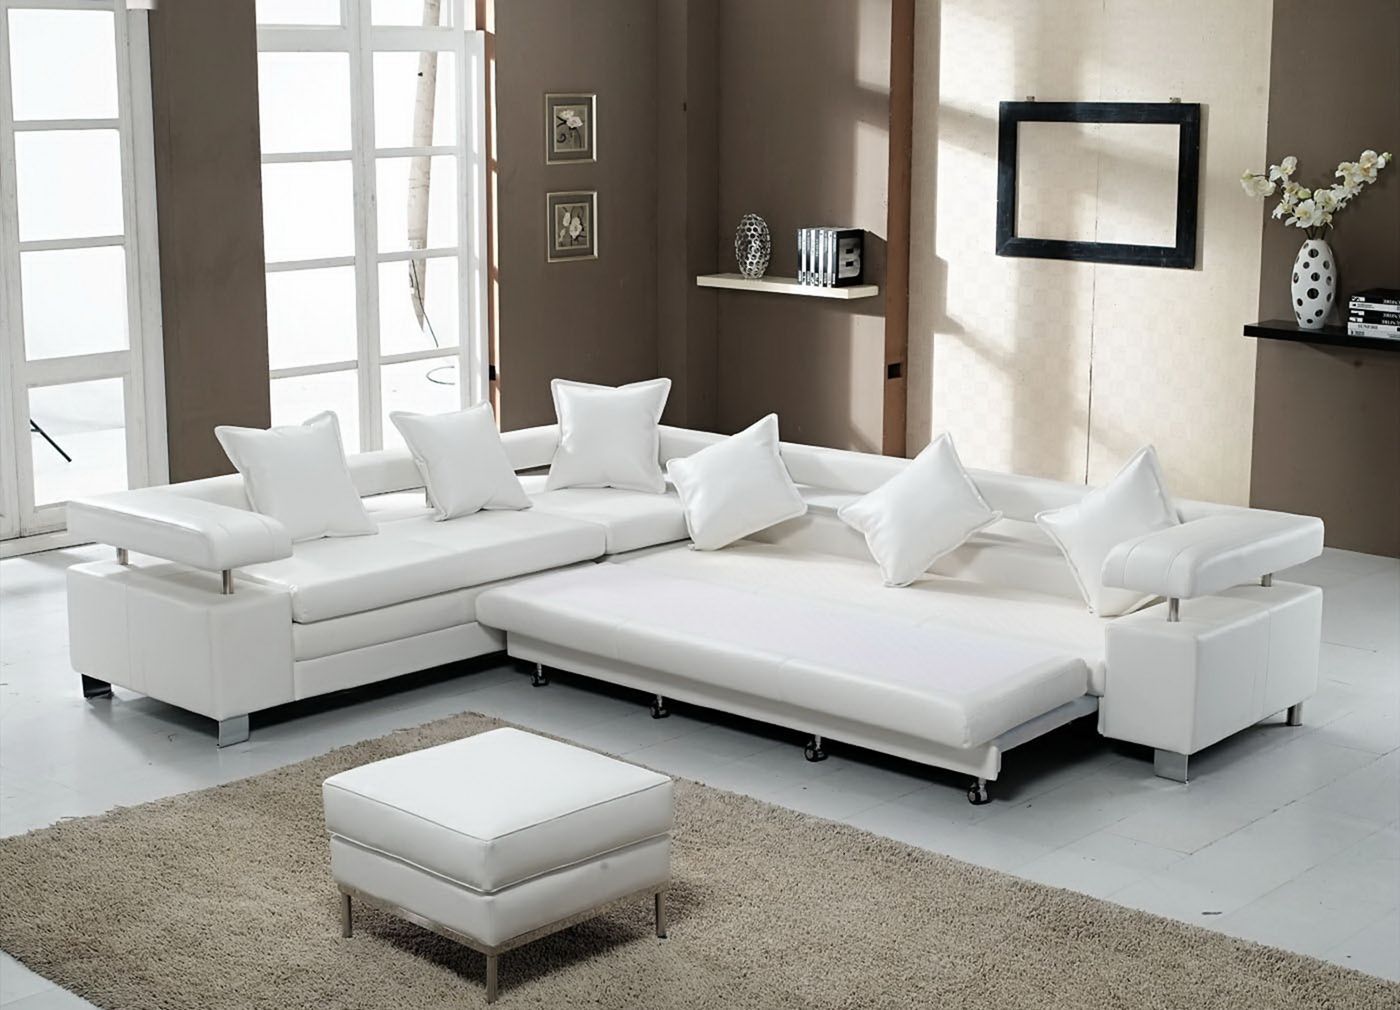 Elegant White Sofa For Modern Living Room – Goodsgn With Regard To Elegant Sofas And Chairs (View 10 of 15)